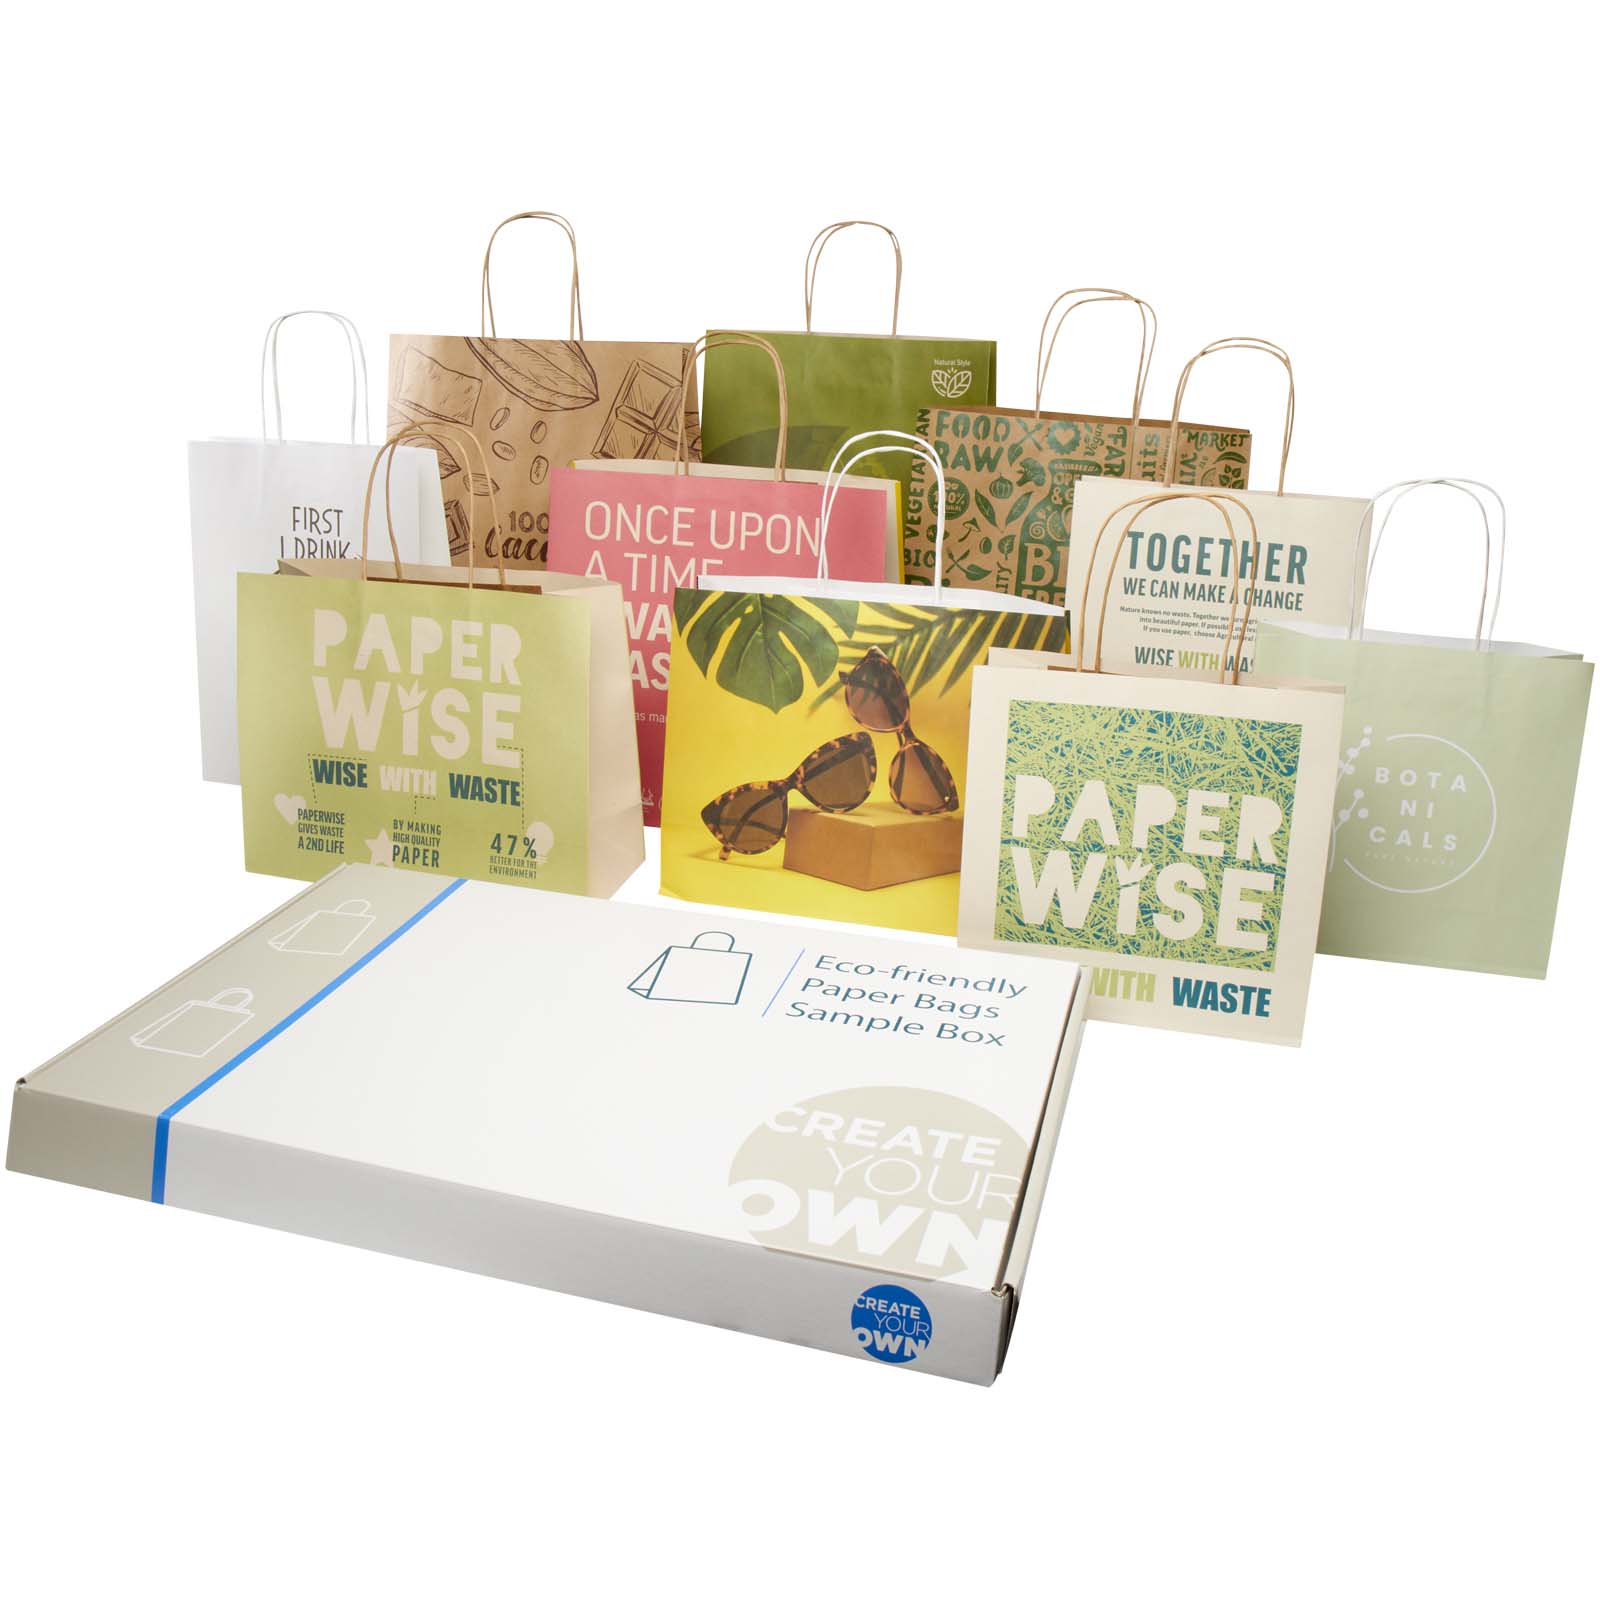 Bags - Agricultural waste and kraft paper bags sample box